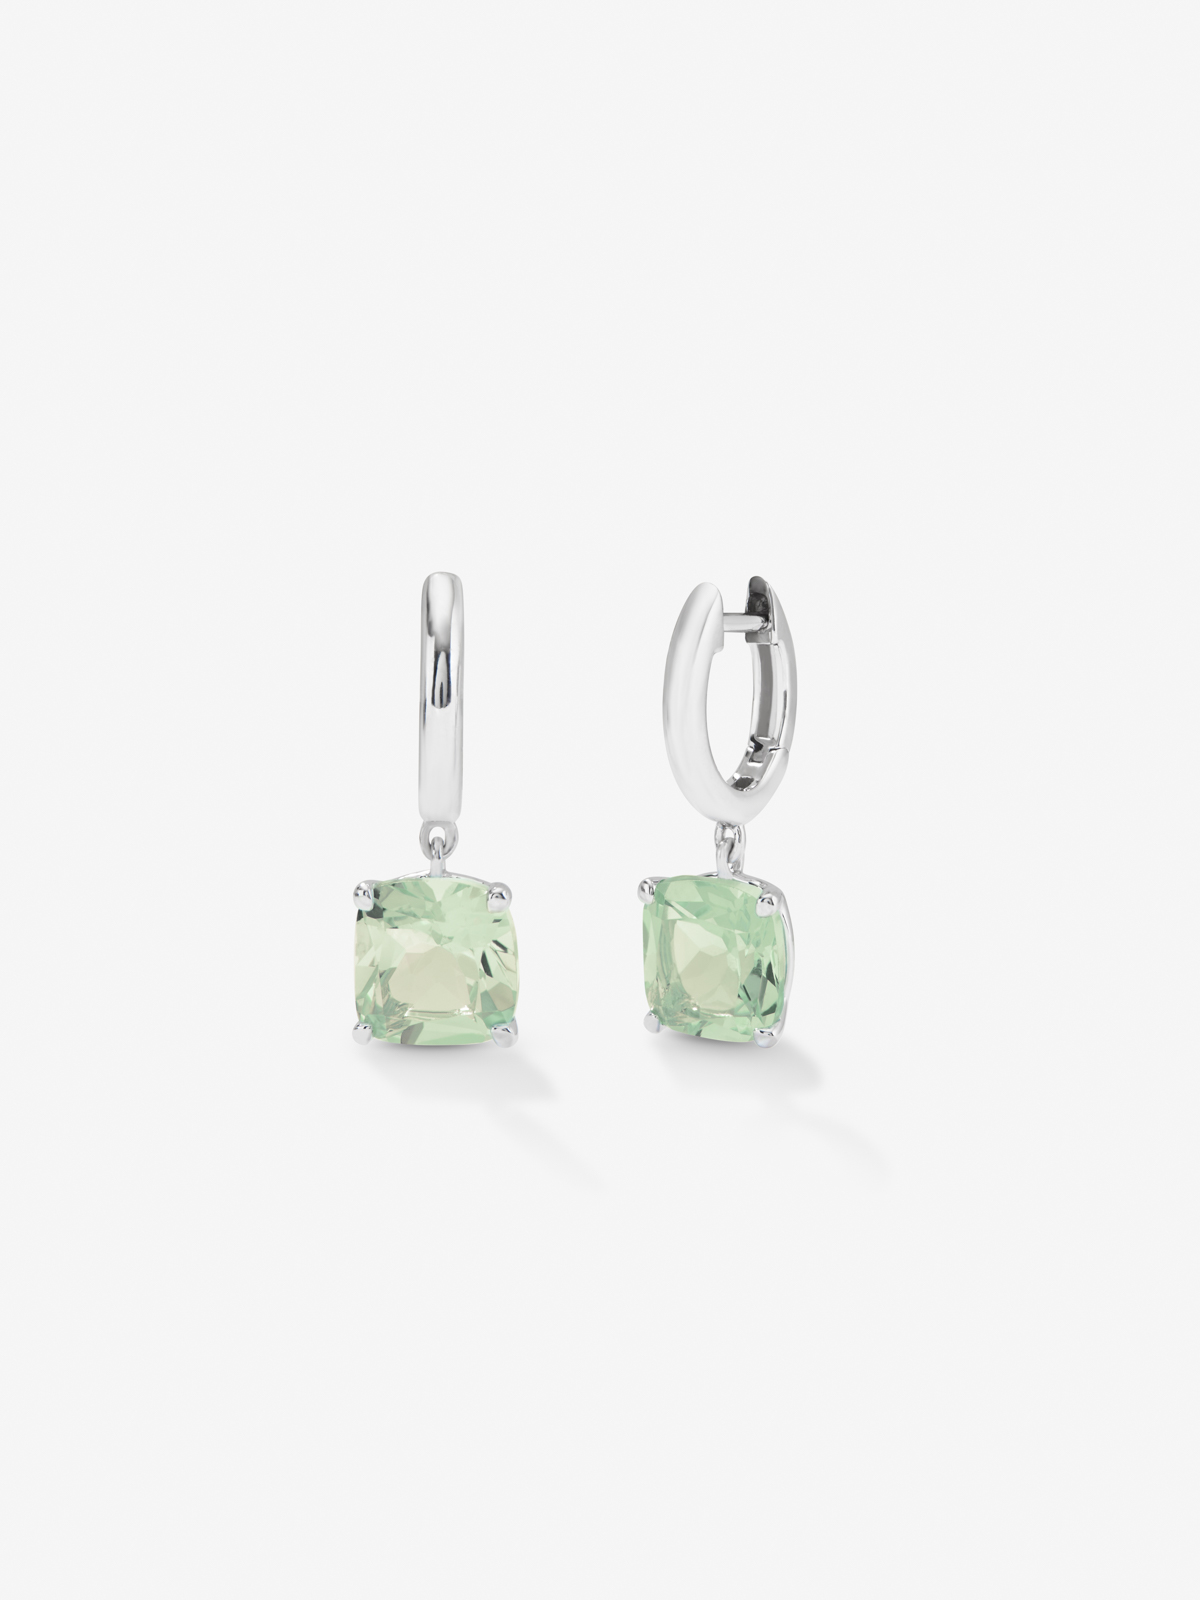 925 silver earrings with green amethists in 5.3 cts Cushion